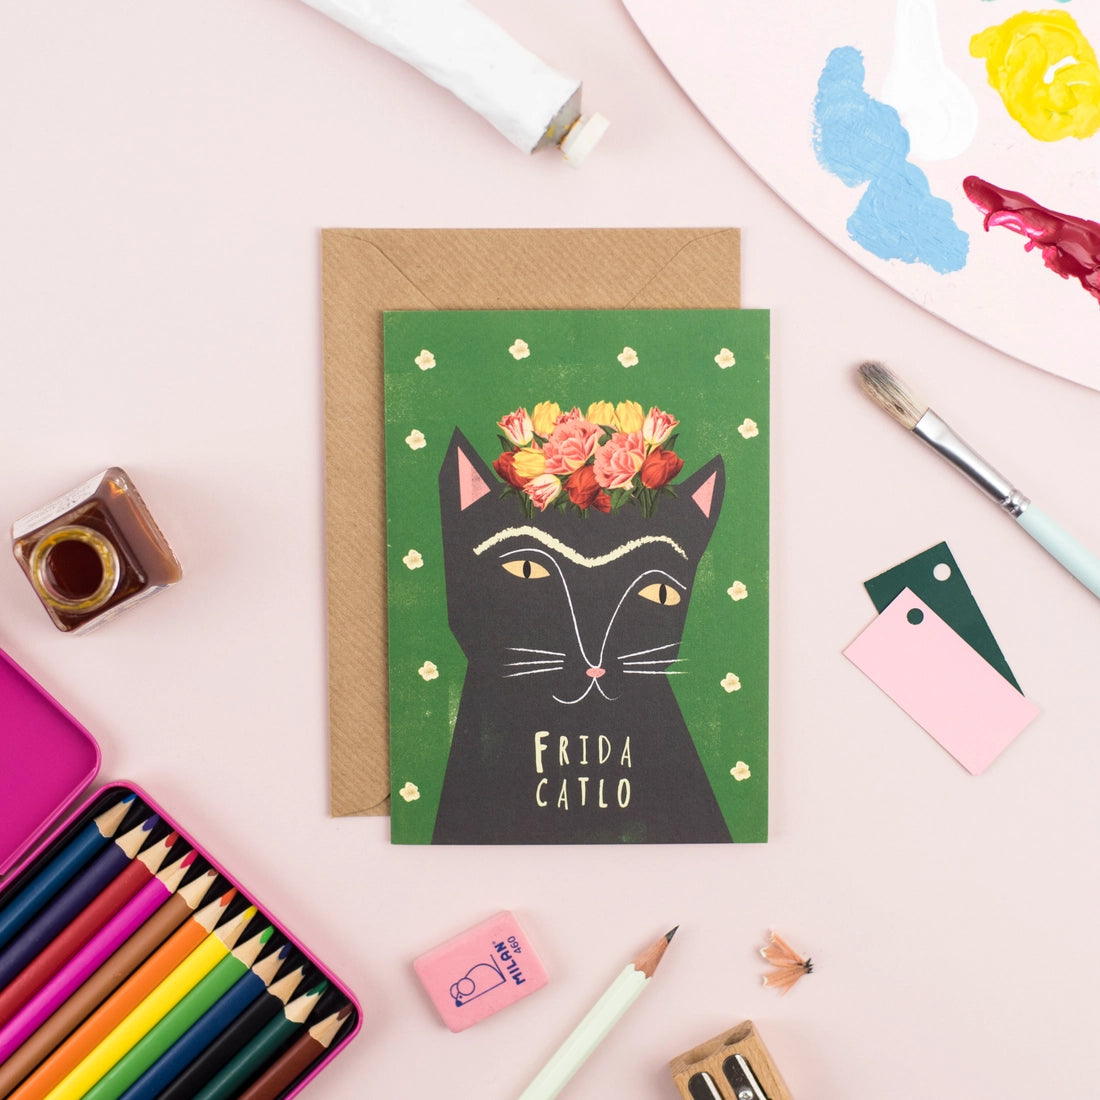 Frida Catlo Greeting card collection